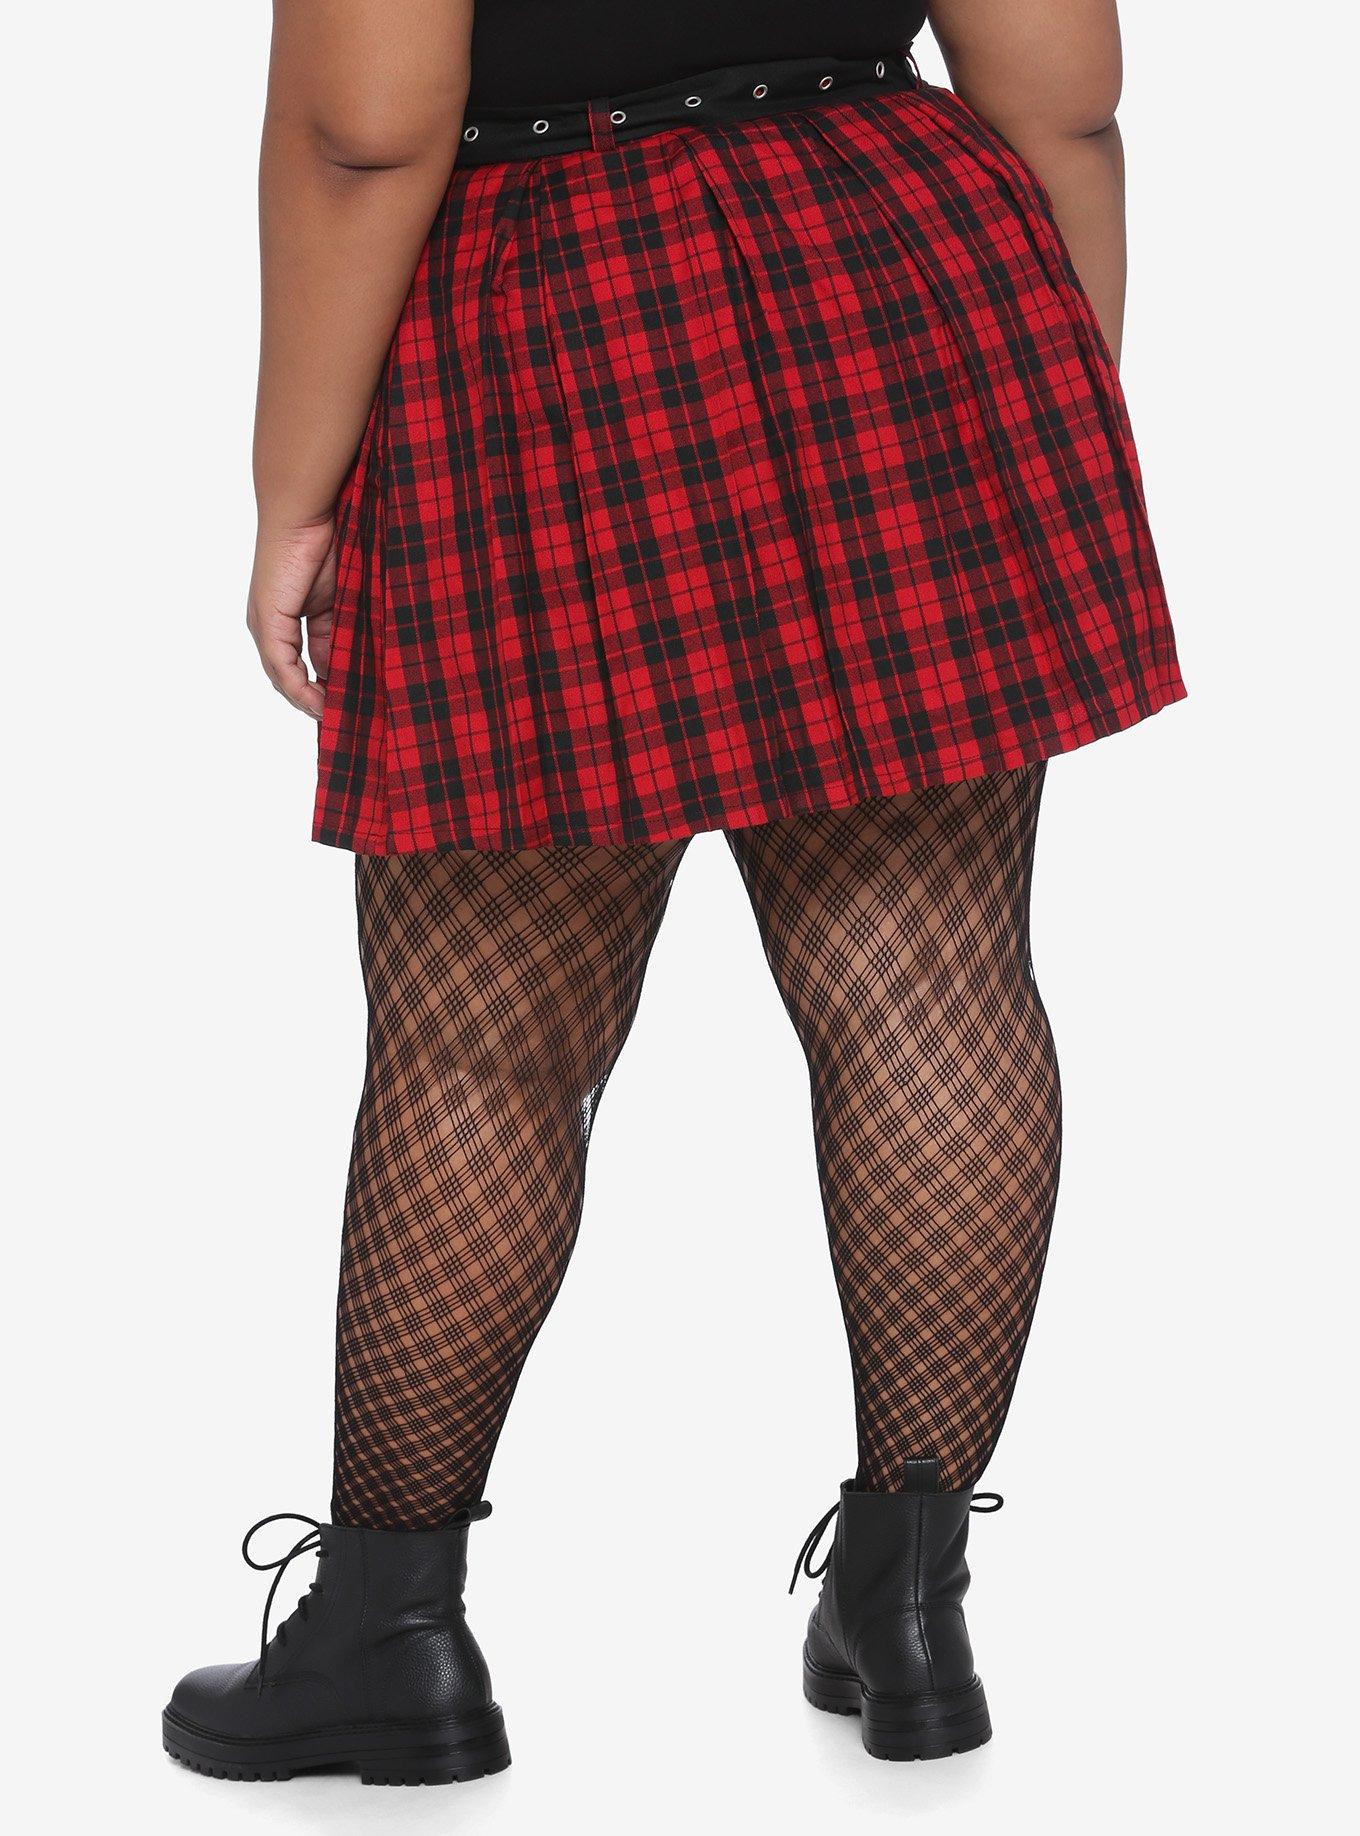 Red & Black Pleated Skirt With Grommet Belt Plus Size, PLAID - RED, alternate